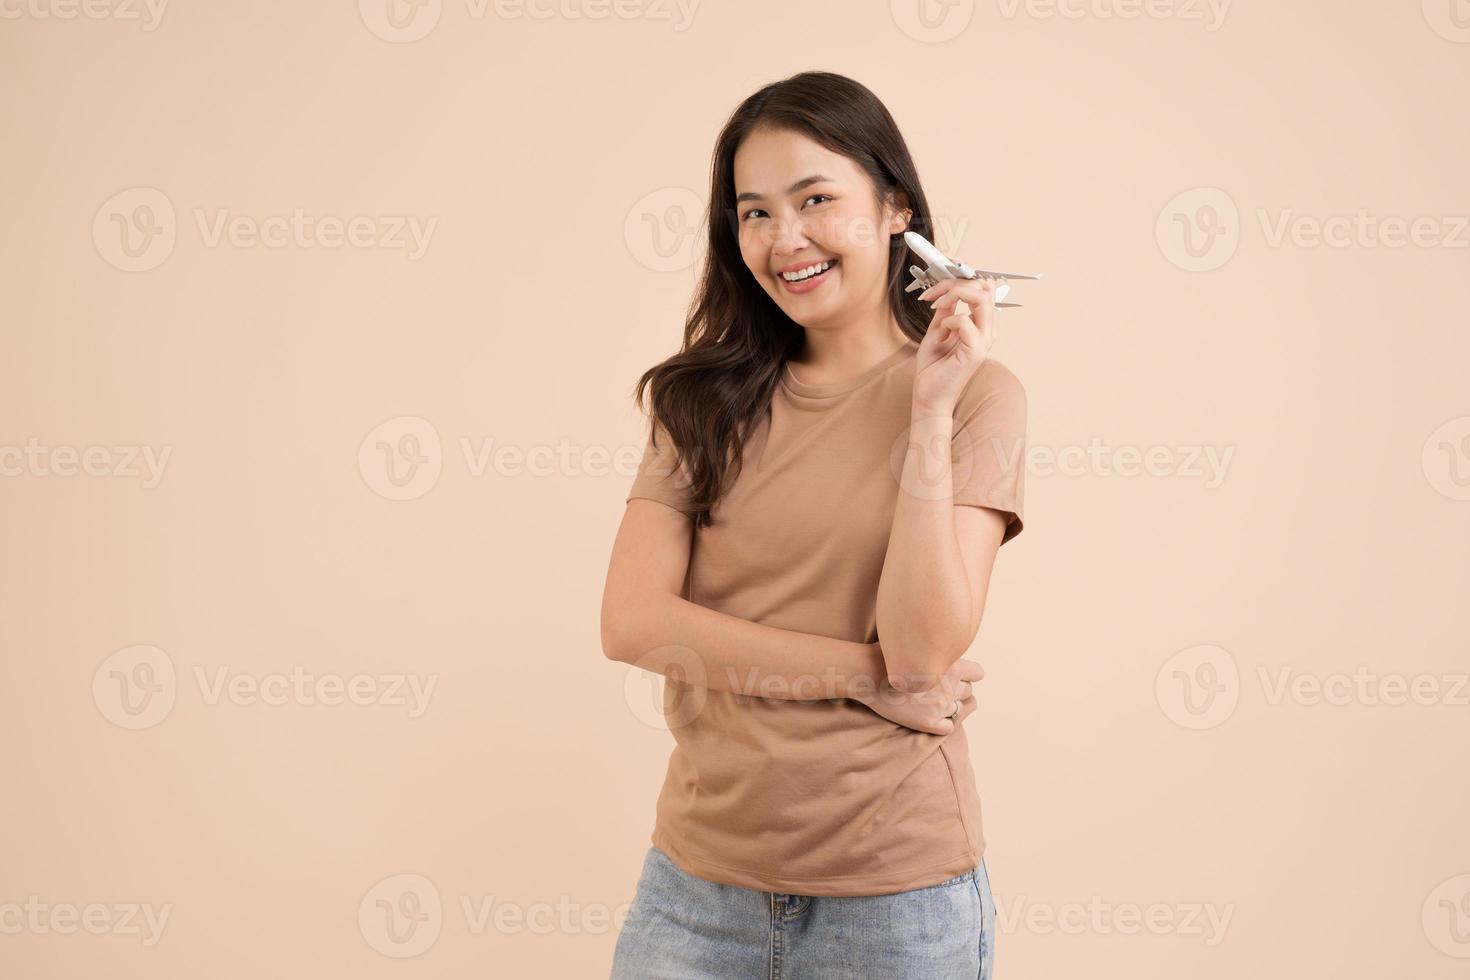 Happy young woman standing and holding a white toy plane dreamer in the studio photo